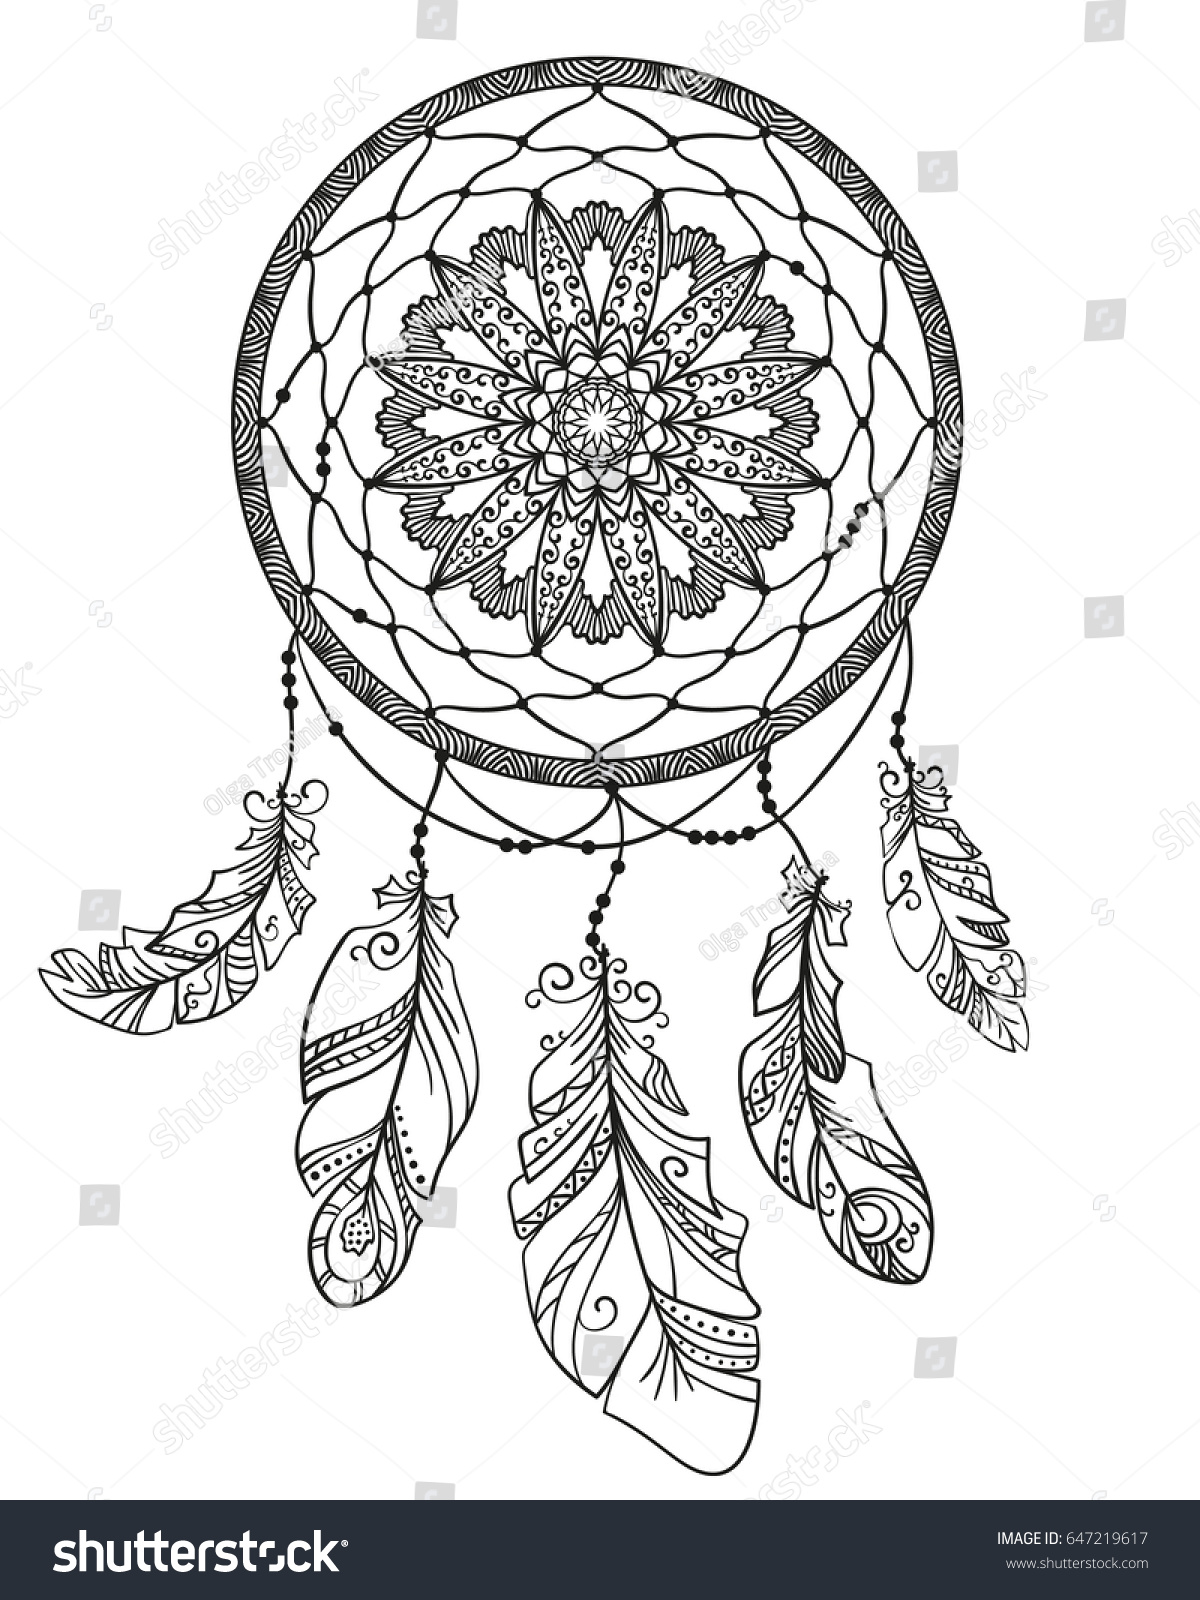 SVG of Hand drawn dreamcatcher with feathers, Page for adult coloring book, Ethnic isolated design element vector svg